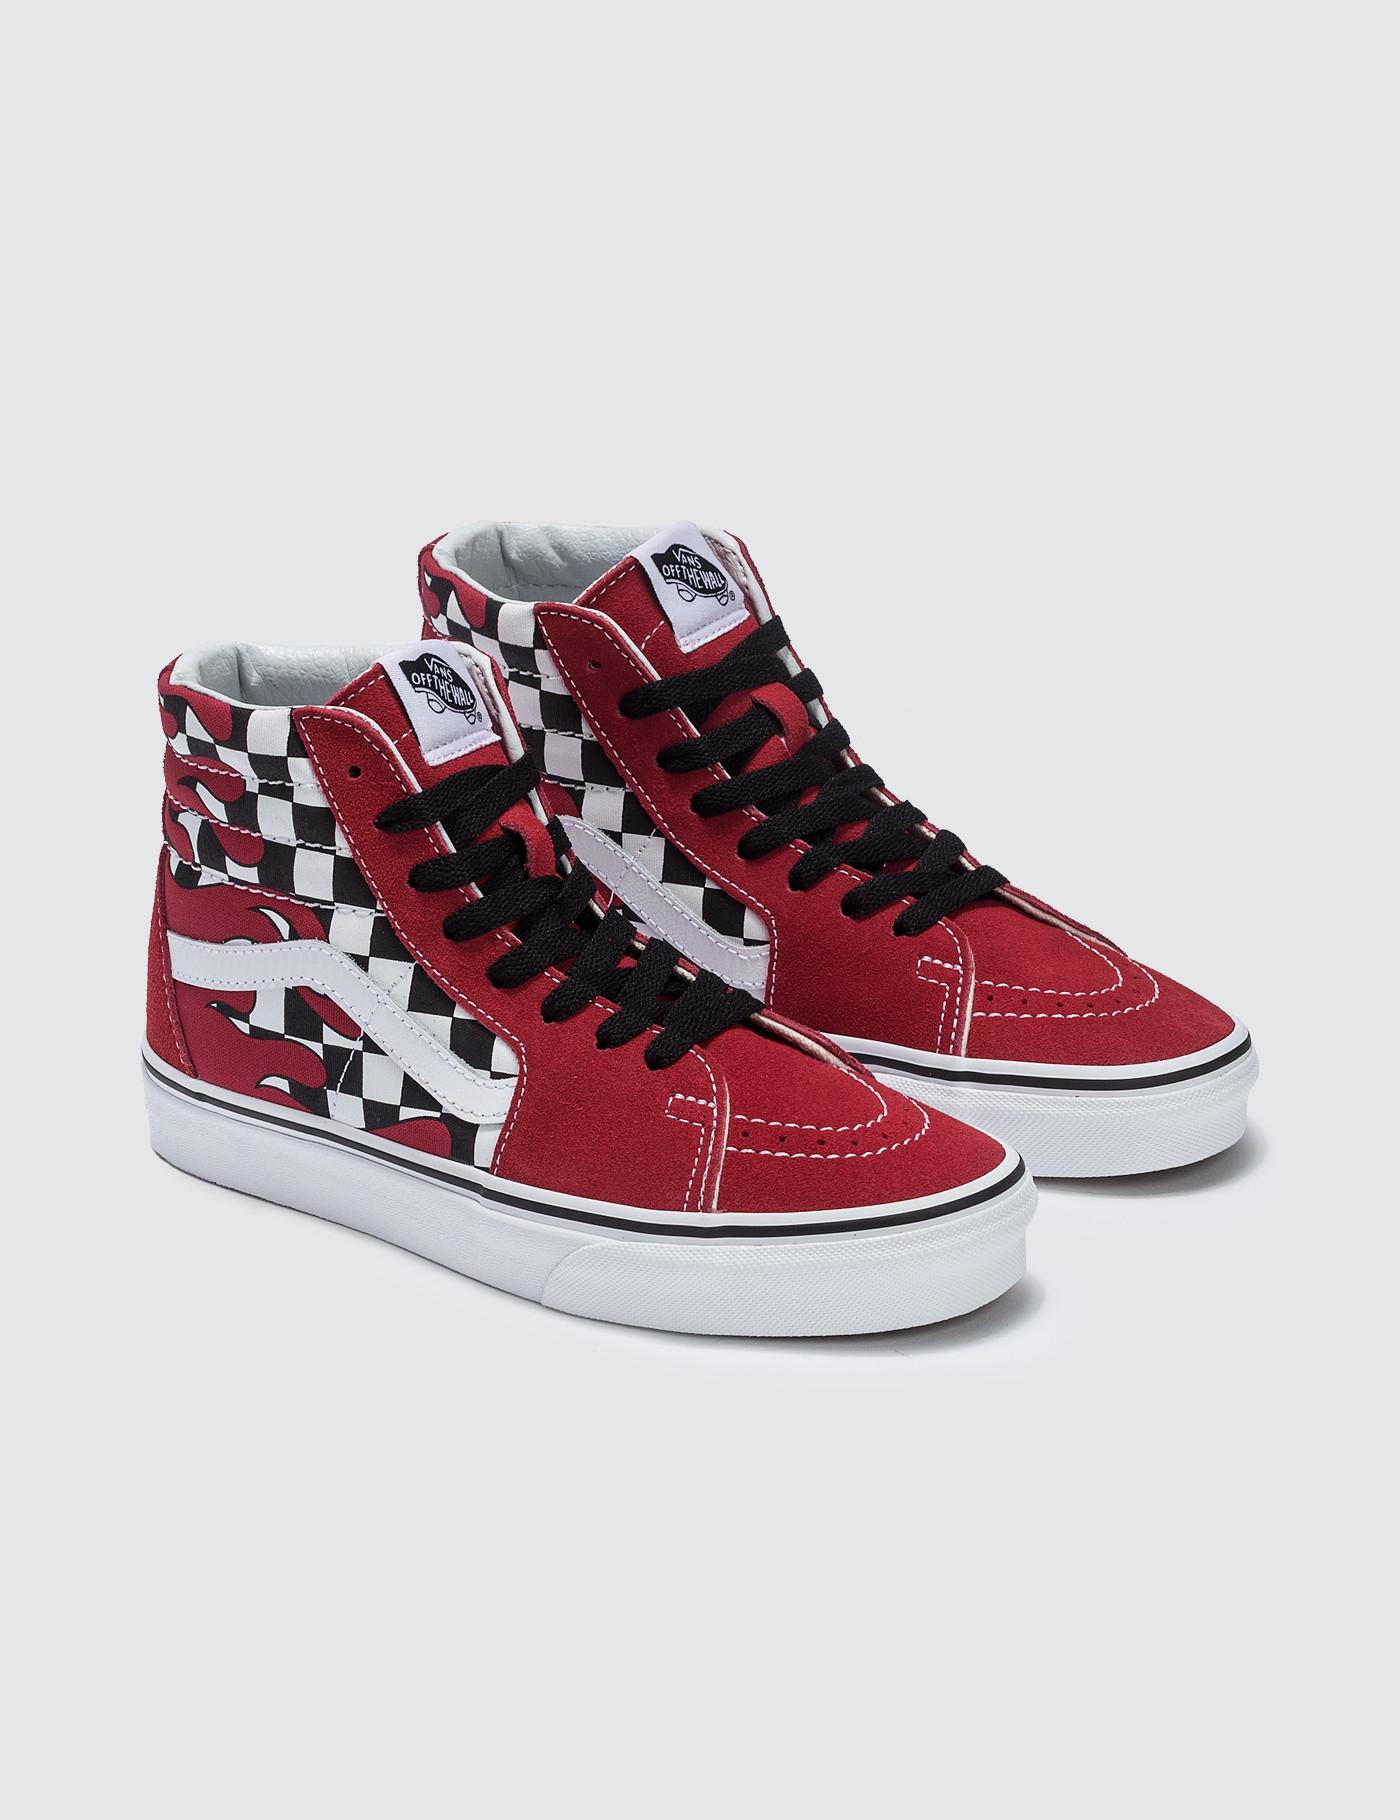 red high top vans checkered | Sale OFF-65%